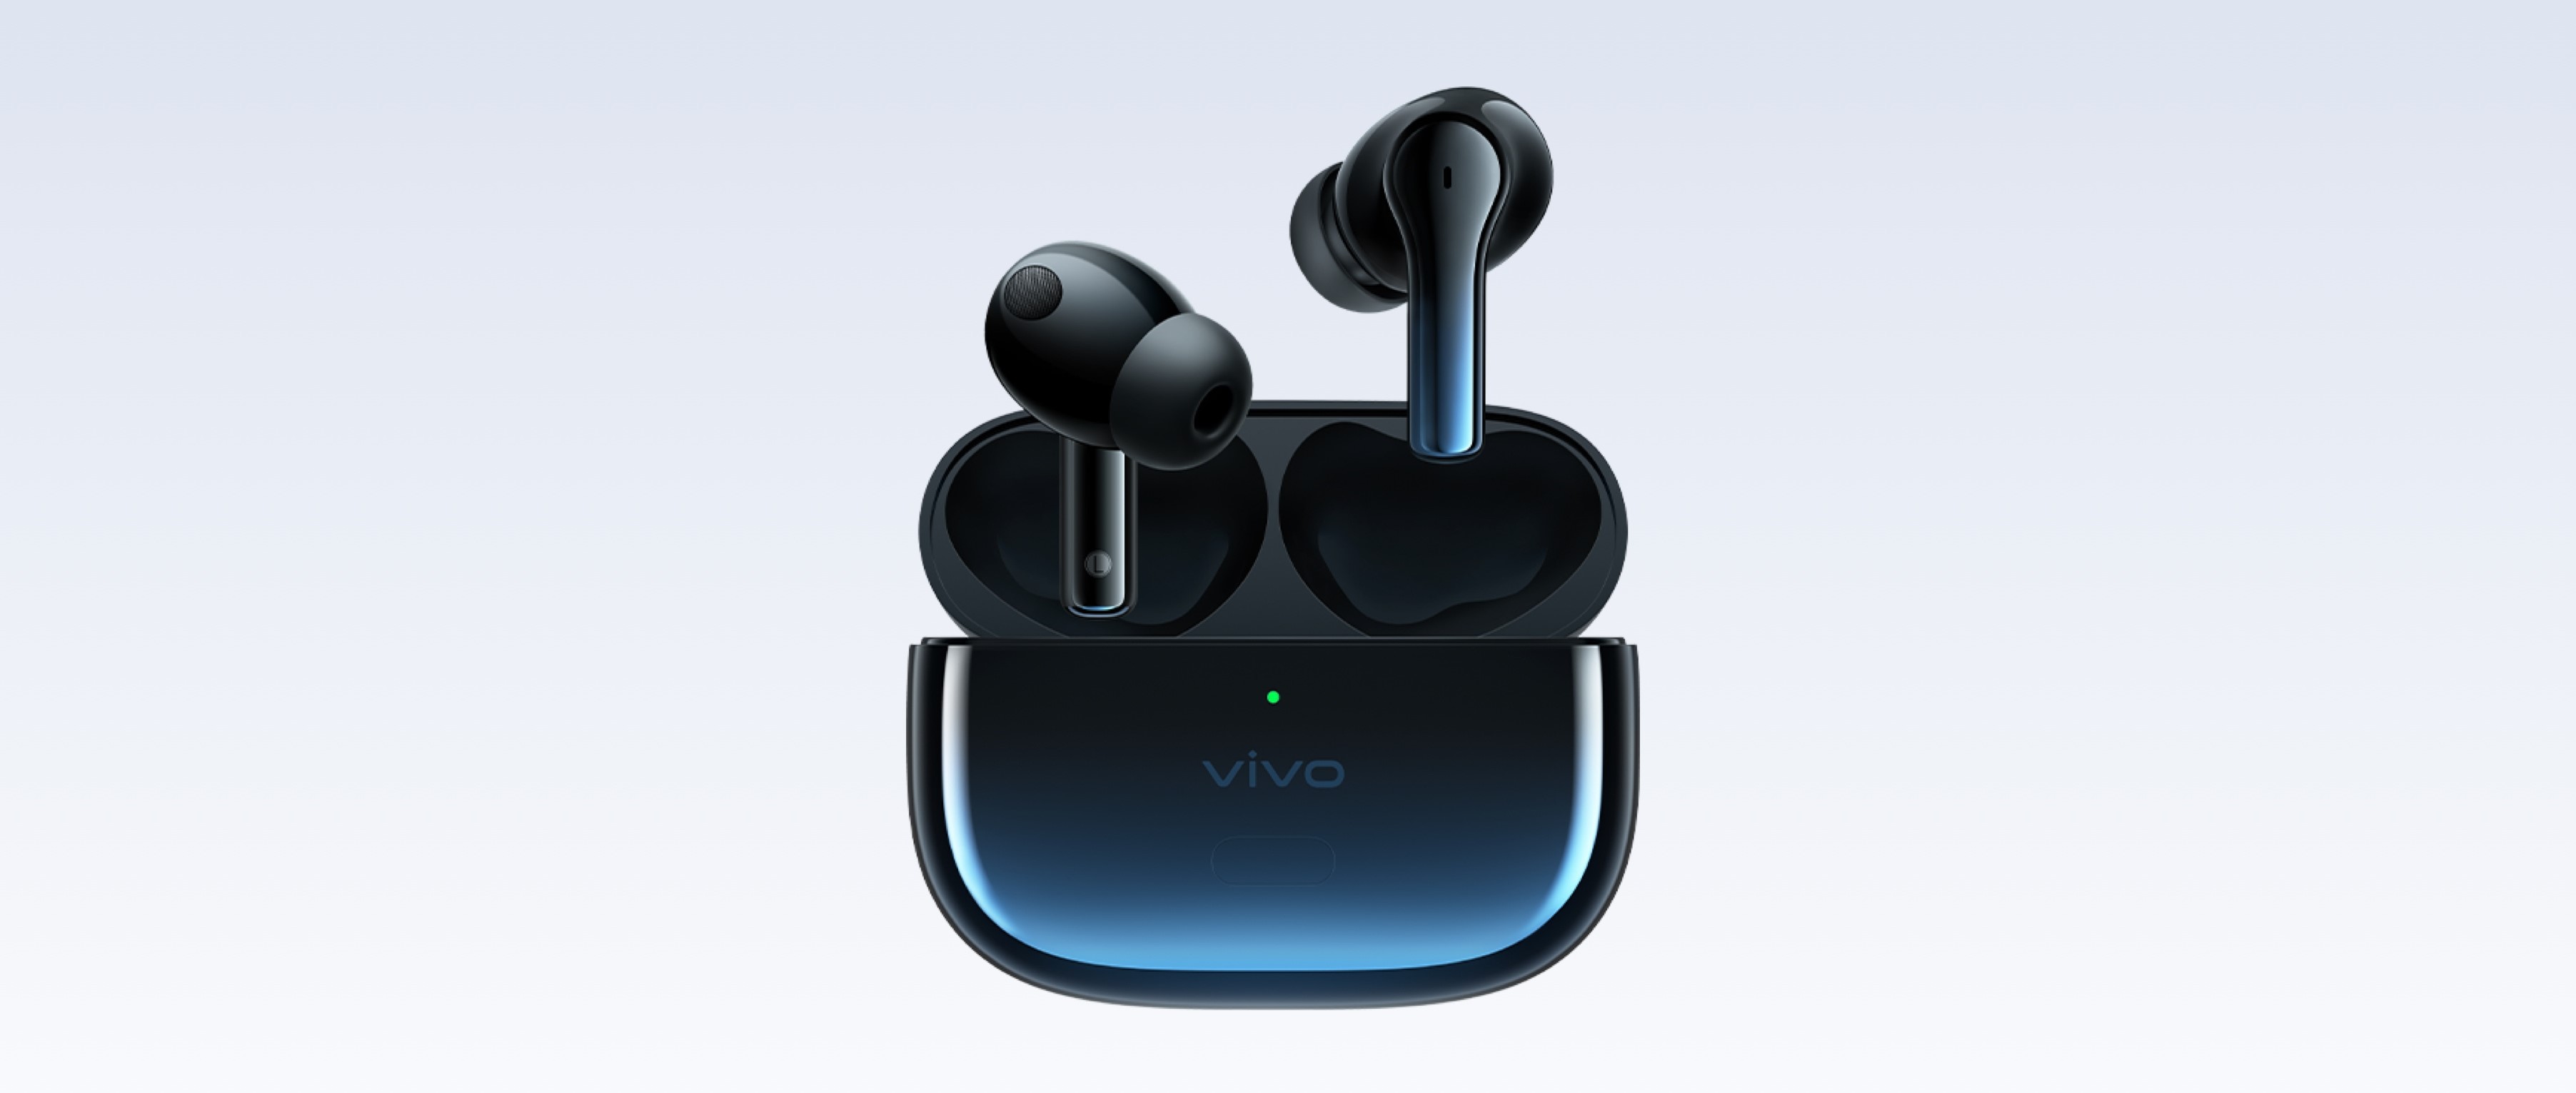 Vivo TWS 2 ANC, TWS 2E earbuds launched in India - check price, specs ...